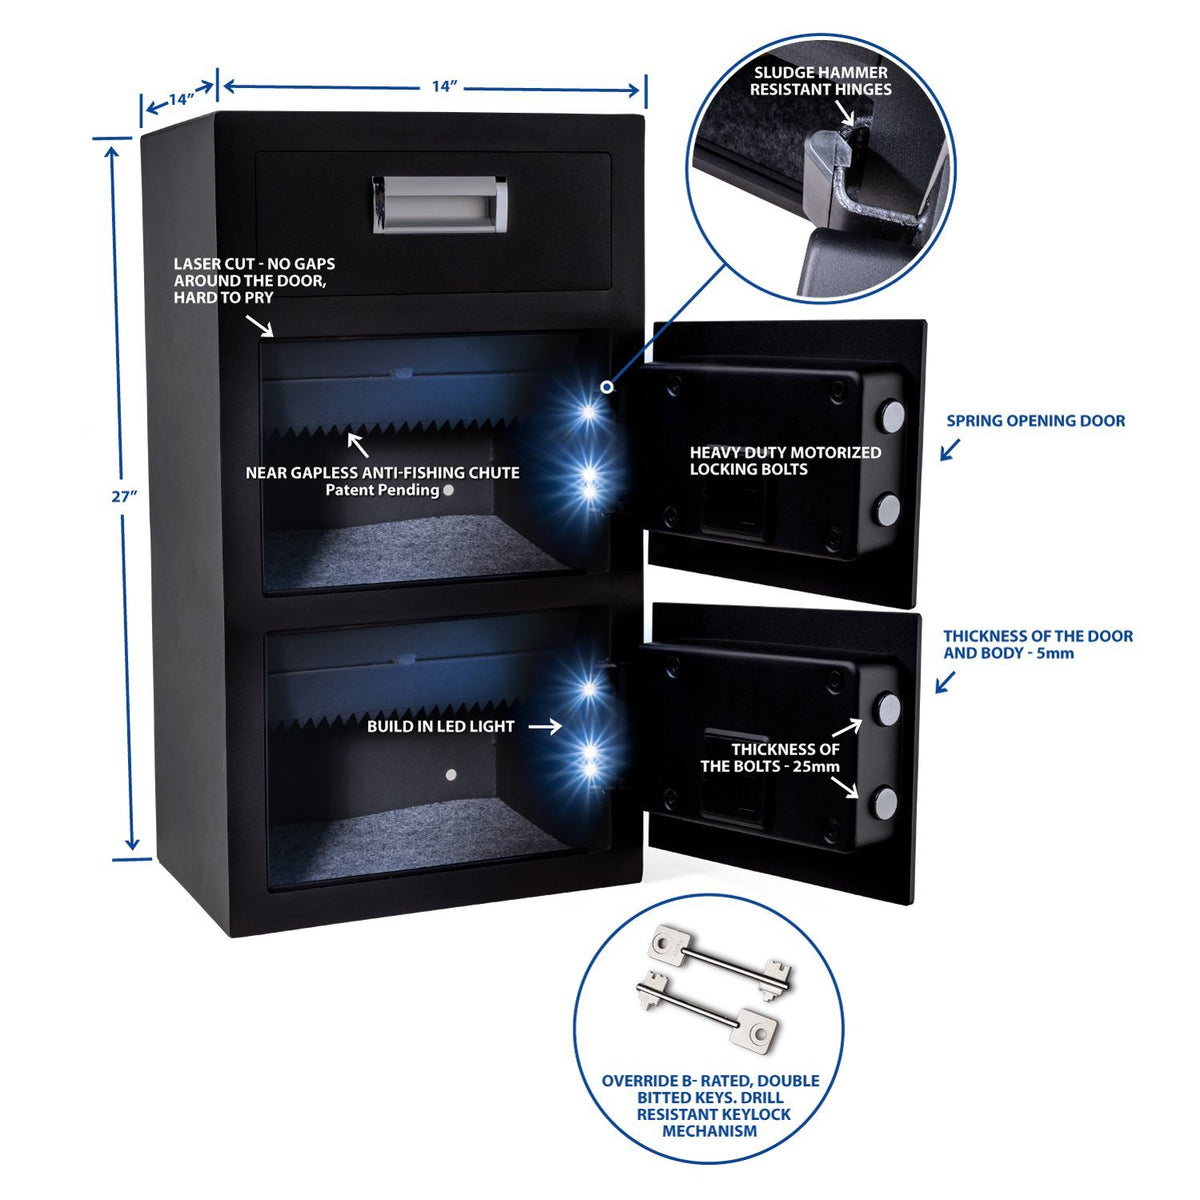 Viking VS-70DS Double Door Depository Safe with Electronic Locks Features with Doors Open an Light Turned on